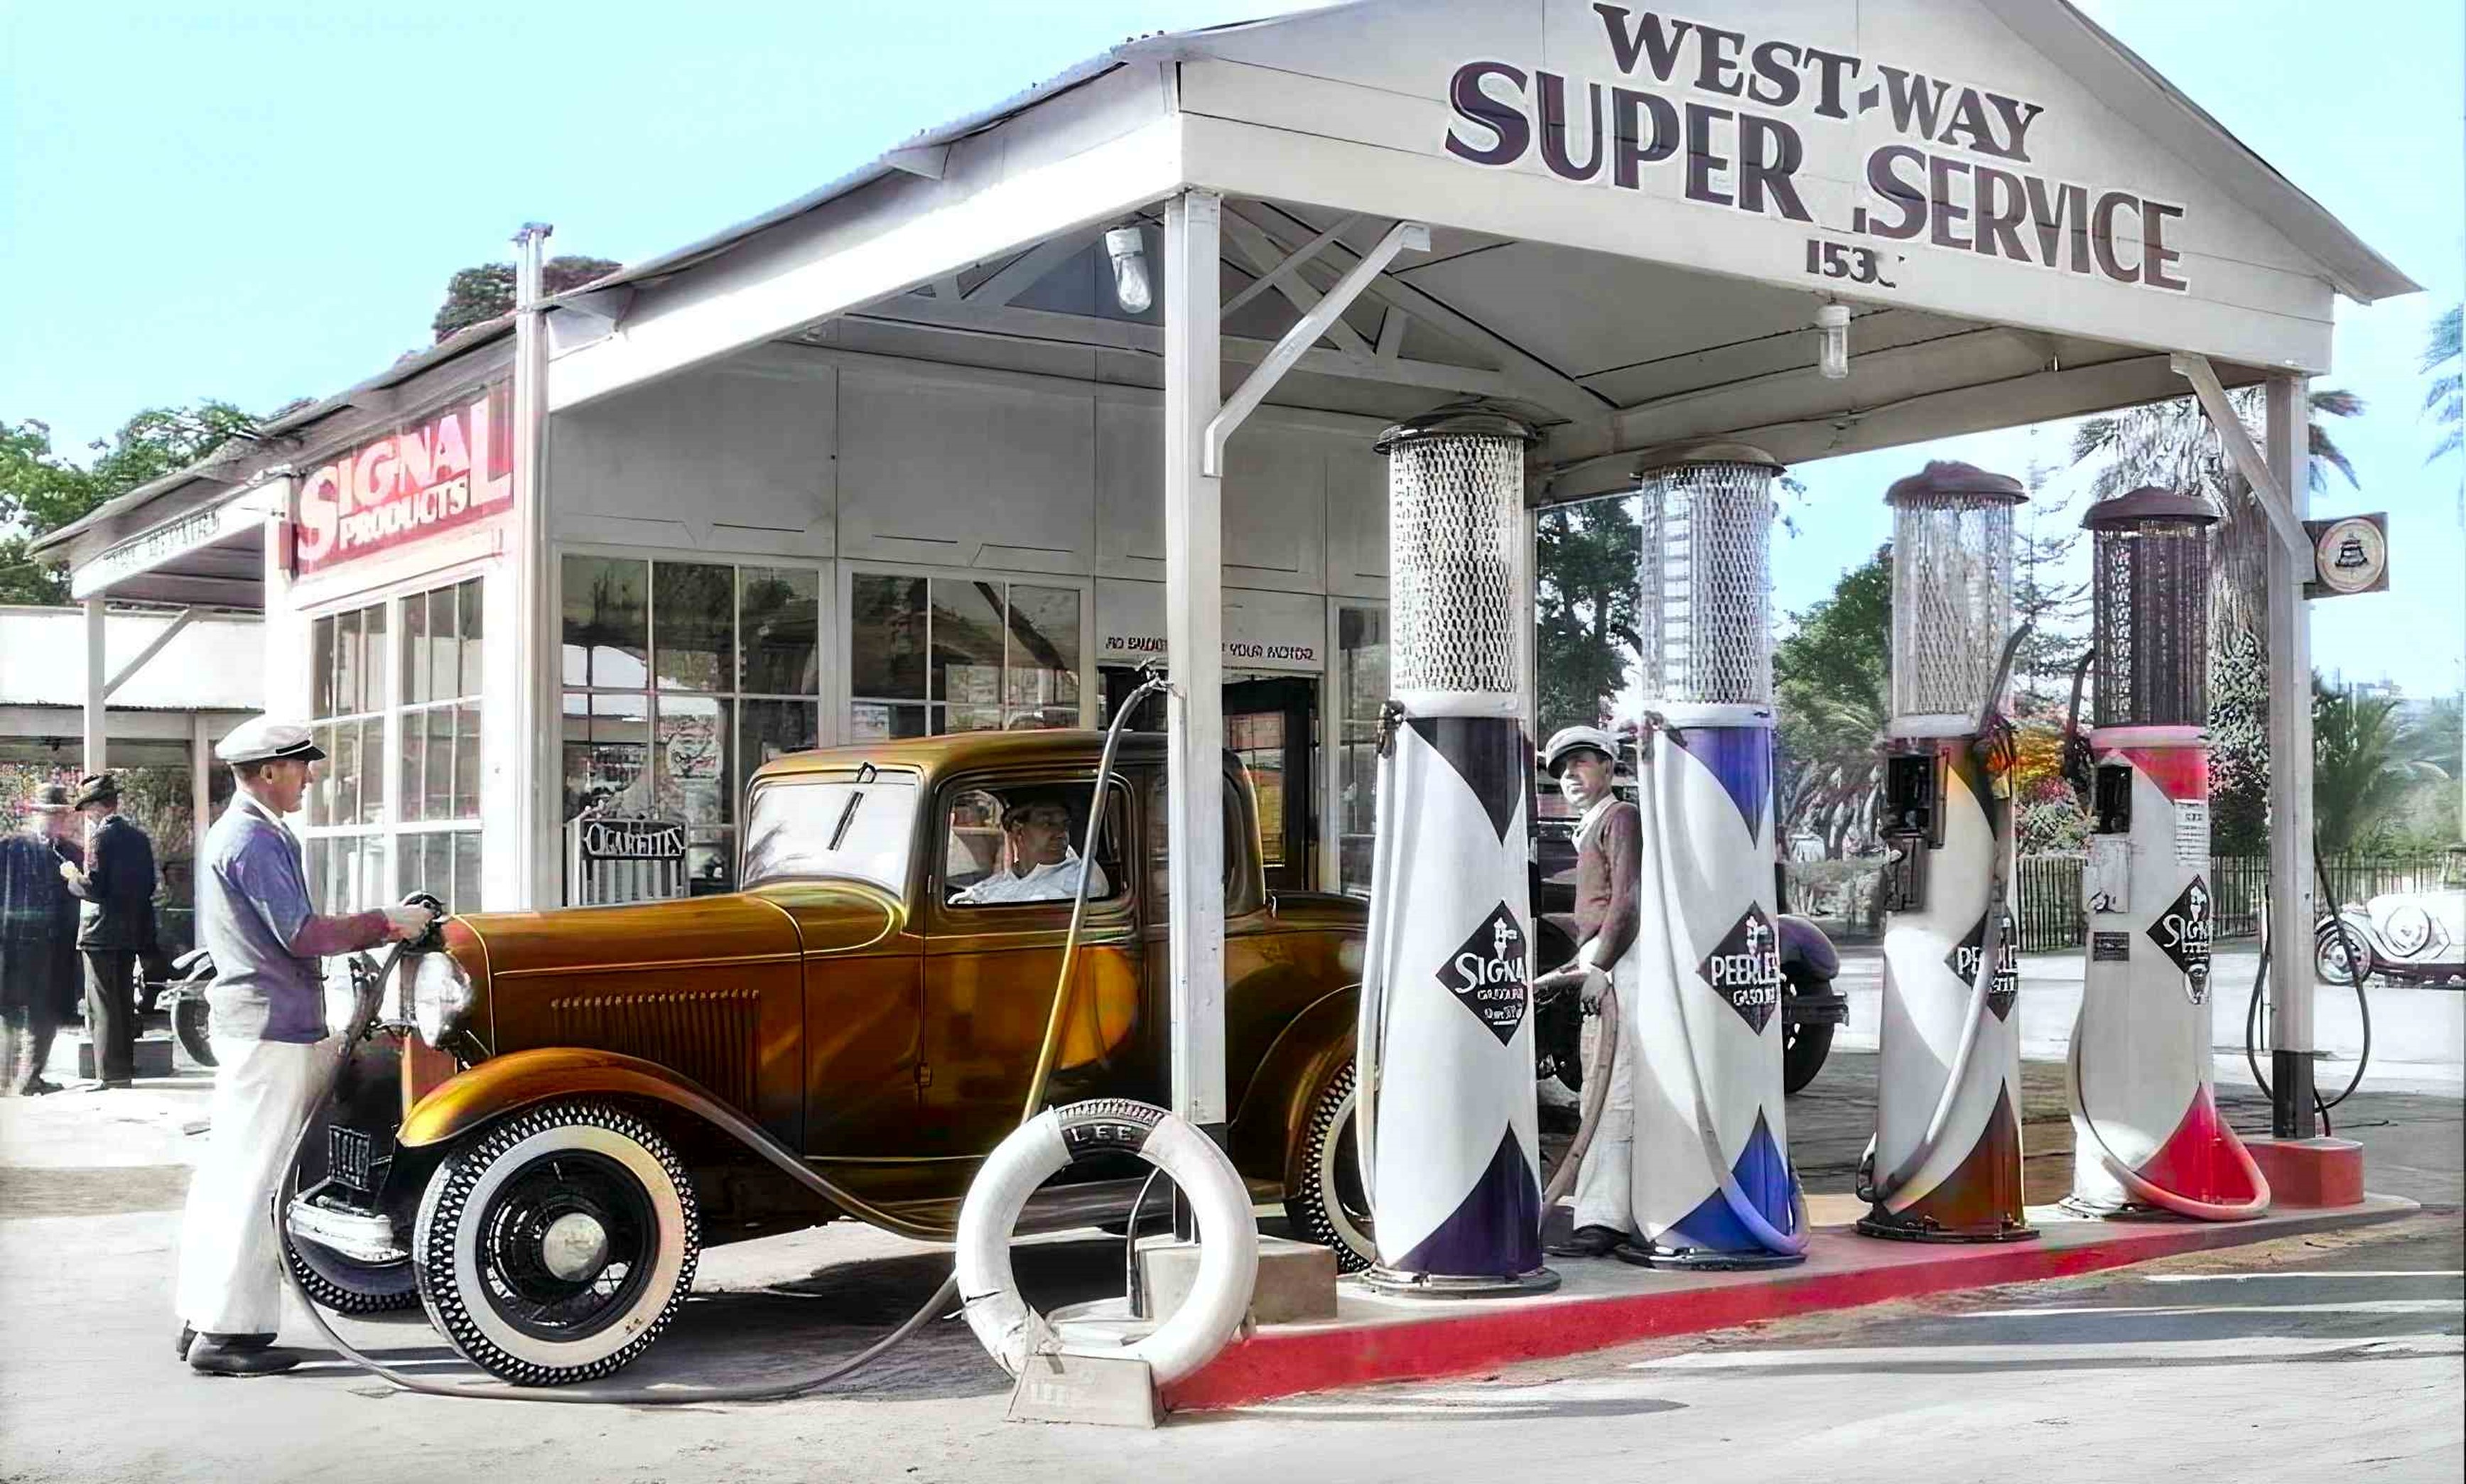 https://waterandpower.org/M1%20Historic%20Photos%20M1/West_Way_Gas_Station_Colorized.jpg